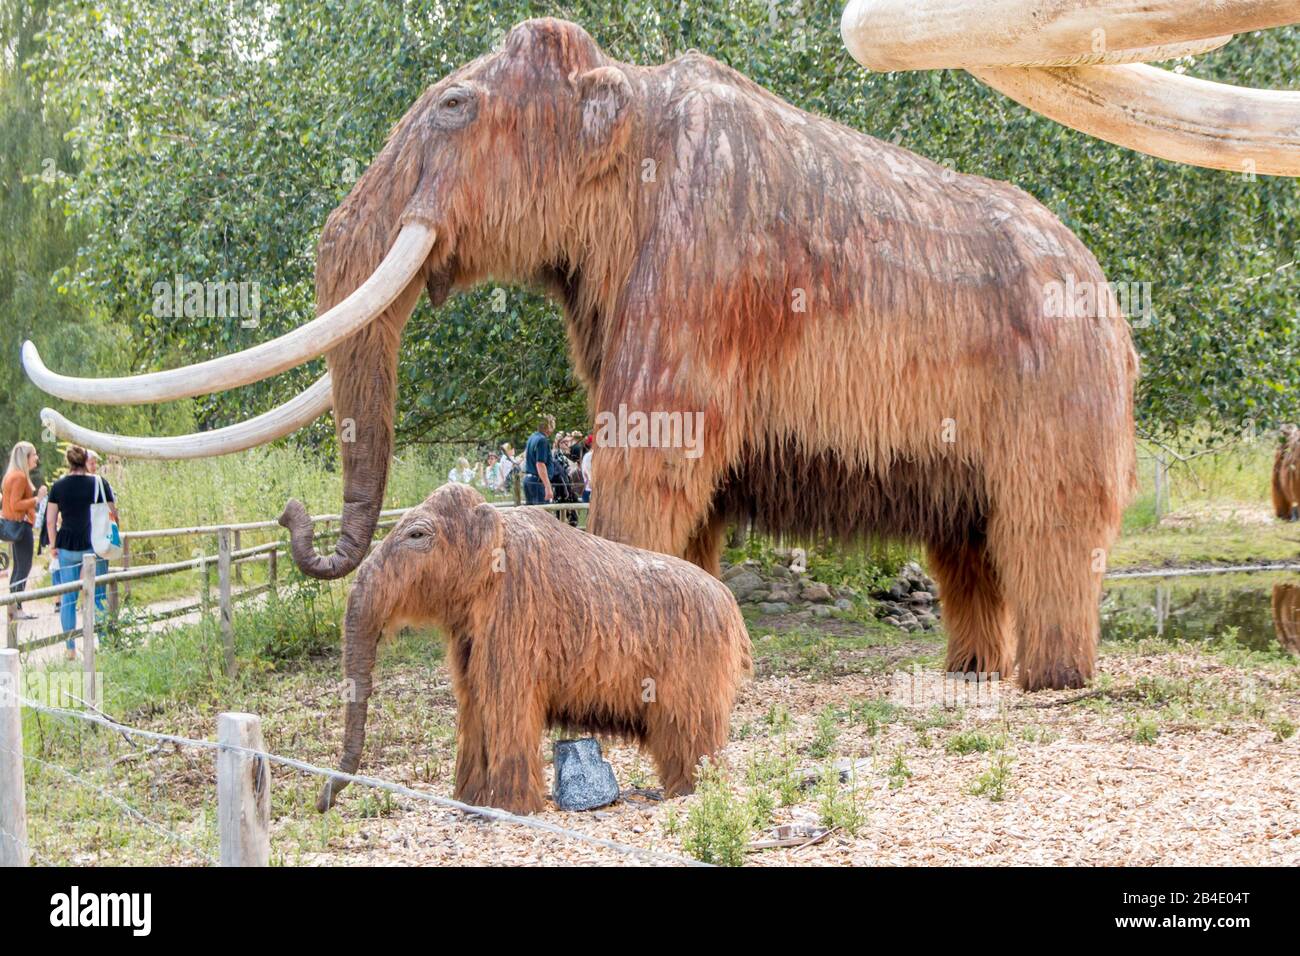 Giveskud, Denmark - 16 juli 2020: Stone Age animals in nature believe sizes as they were when they were alive Stock Photo